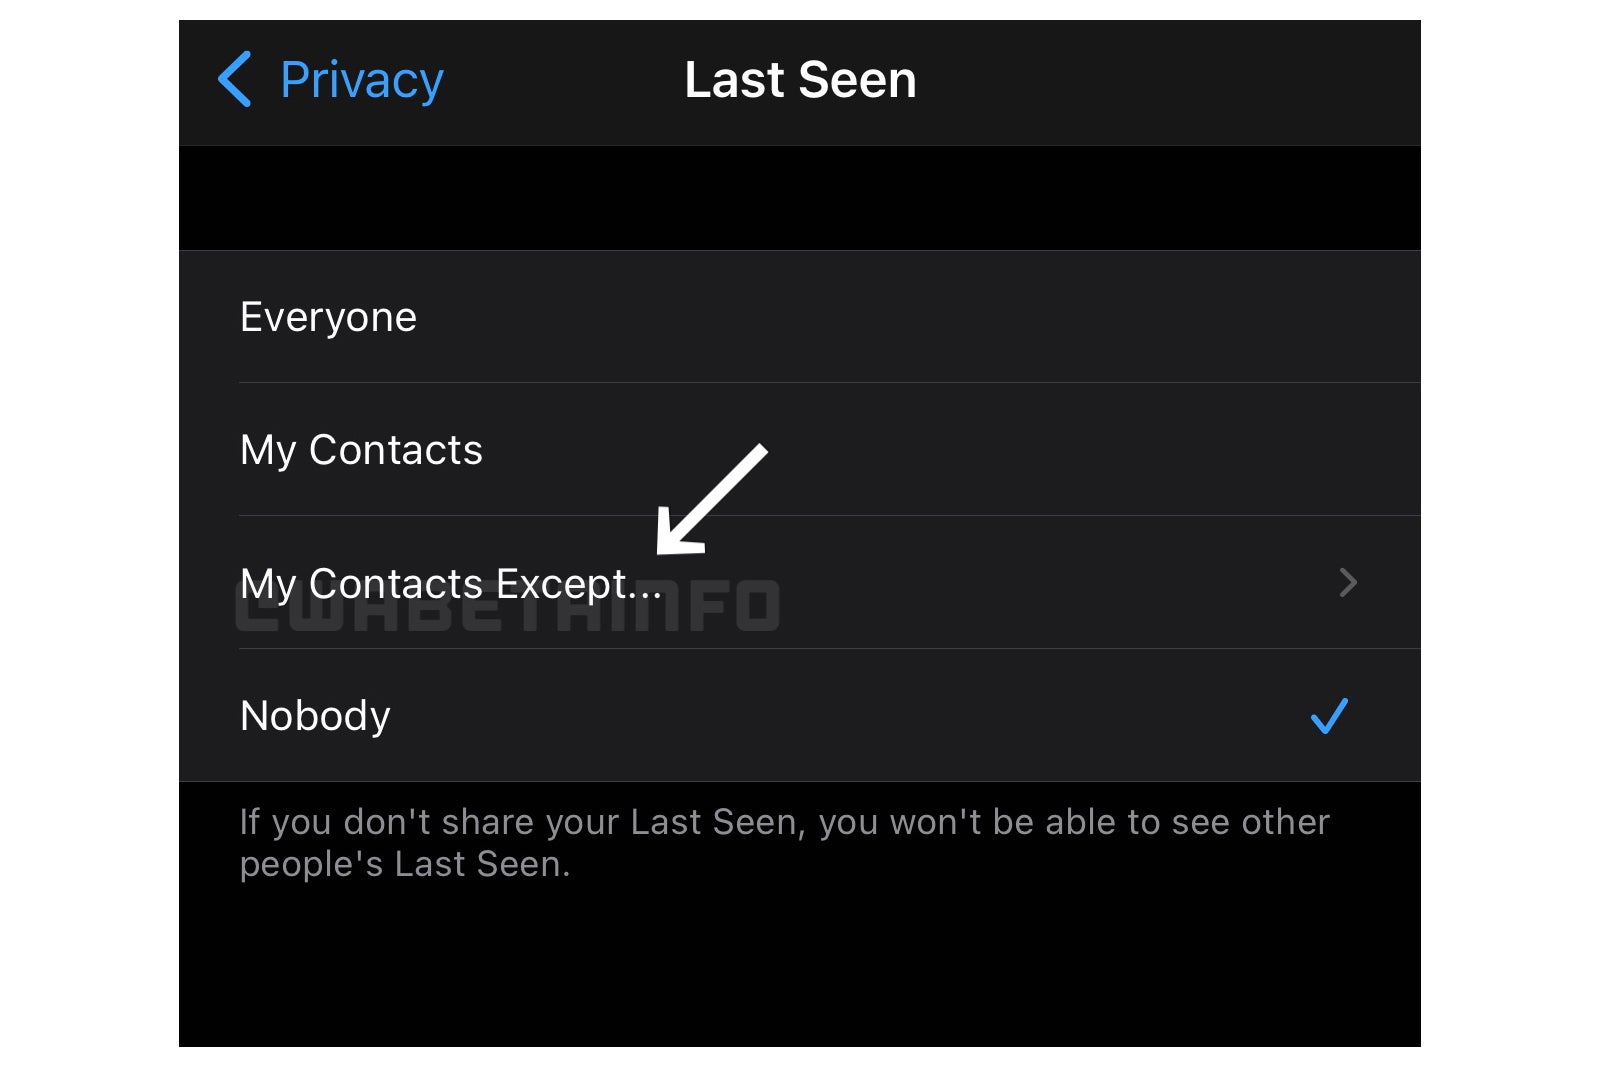 WhatsApp adds new "Last Seen" removal option